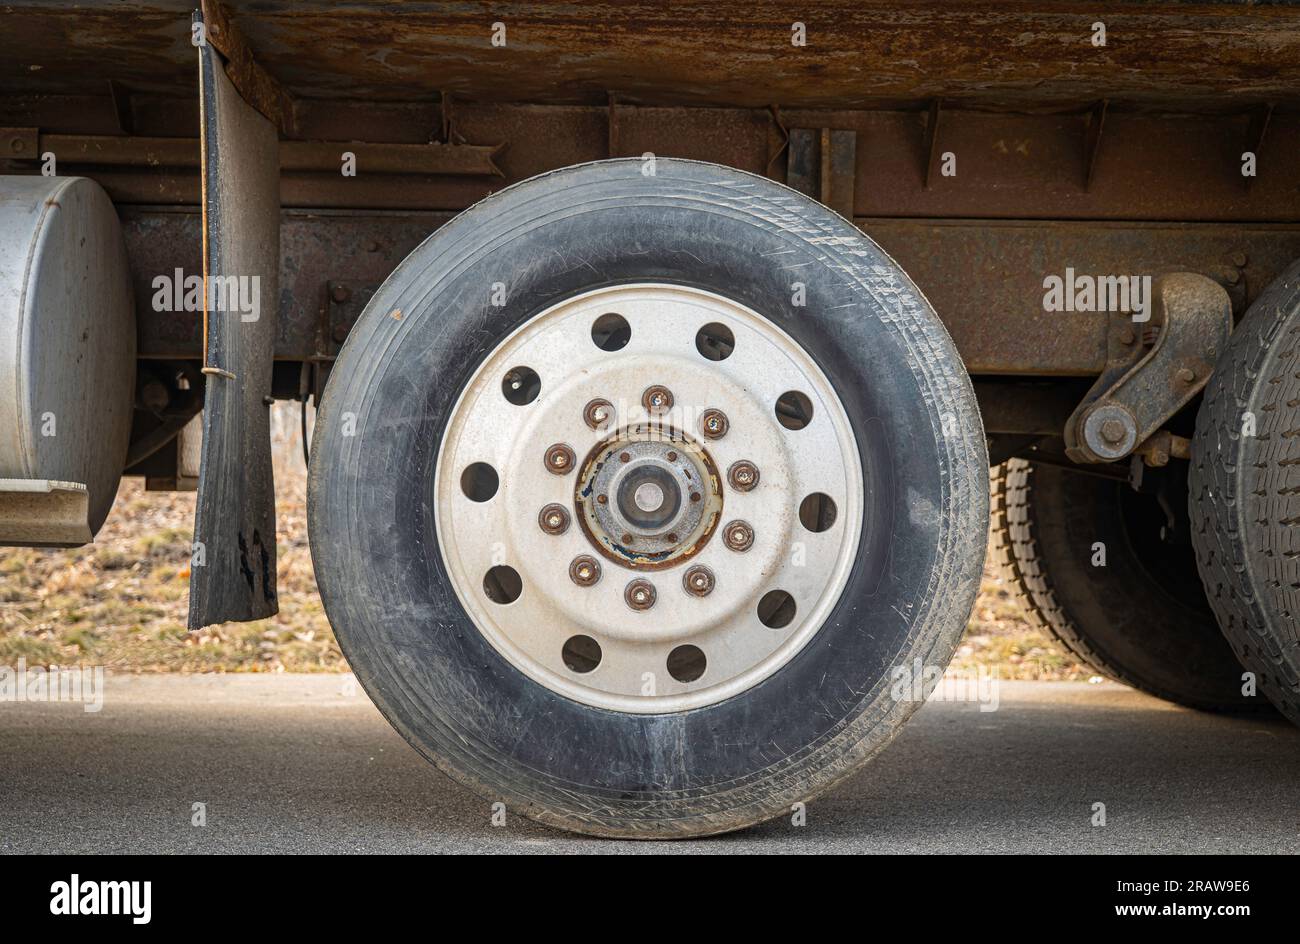 Dusty truck wheel and tire of a truck with round circular pattern. Gas tank and mud flap are also seen. Stock Photo